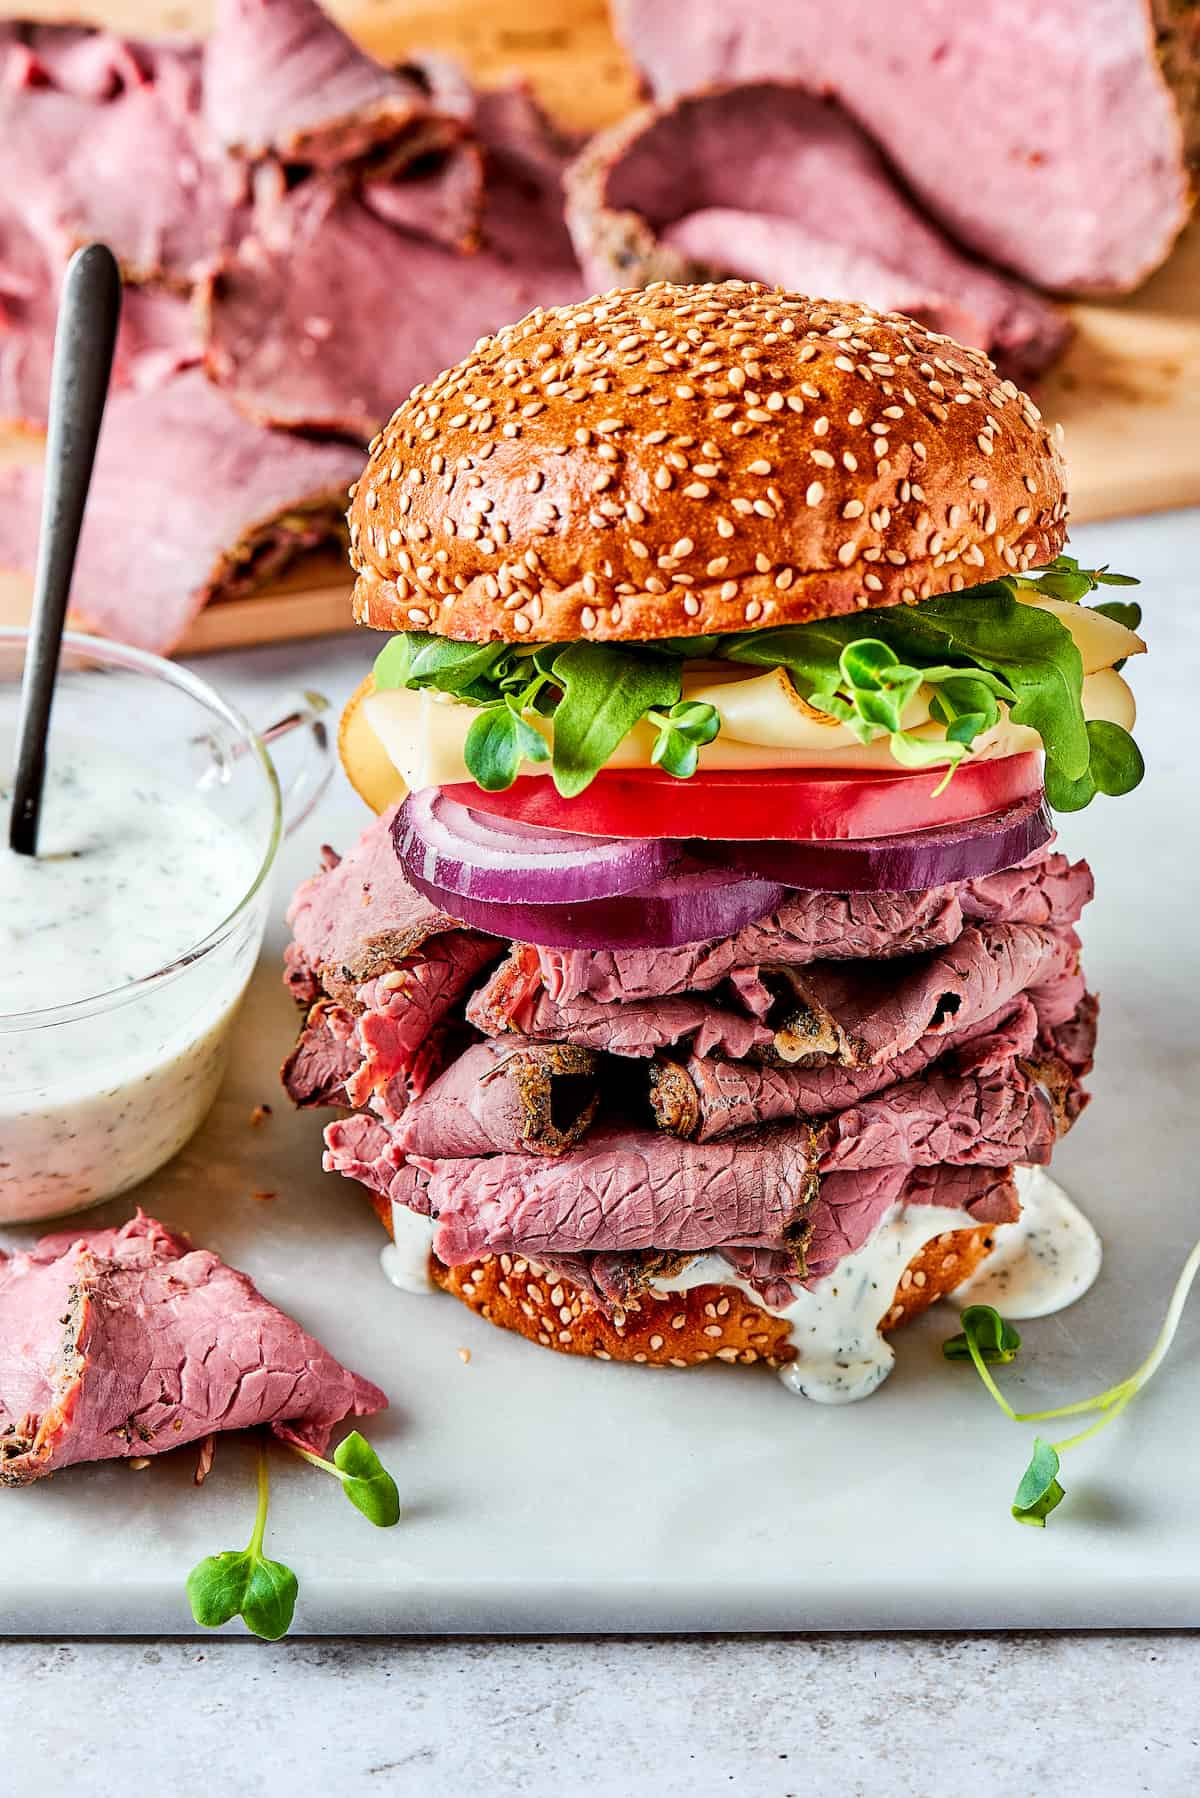 A roast beef sandwich with toppings.